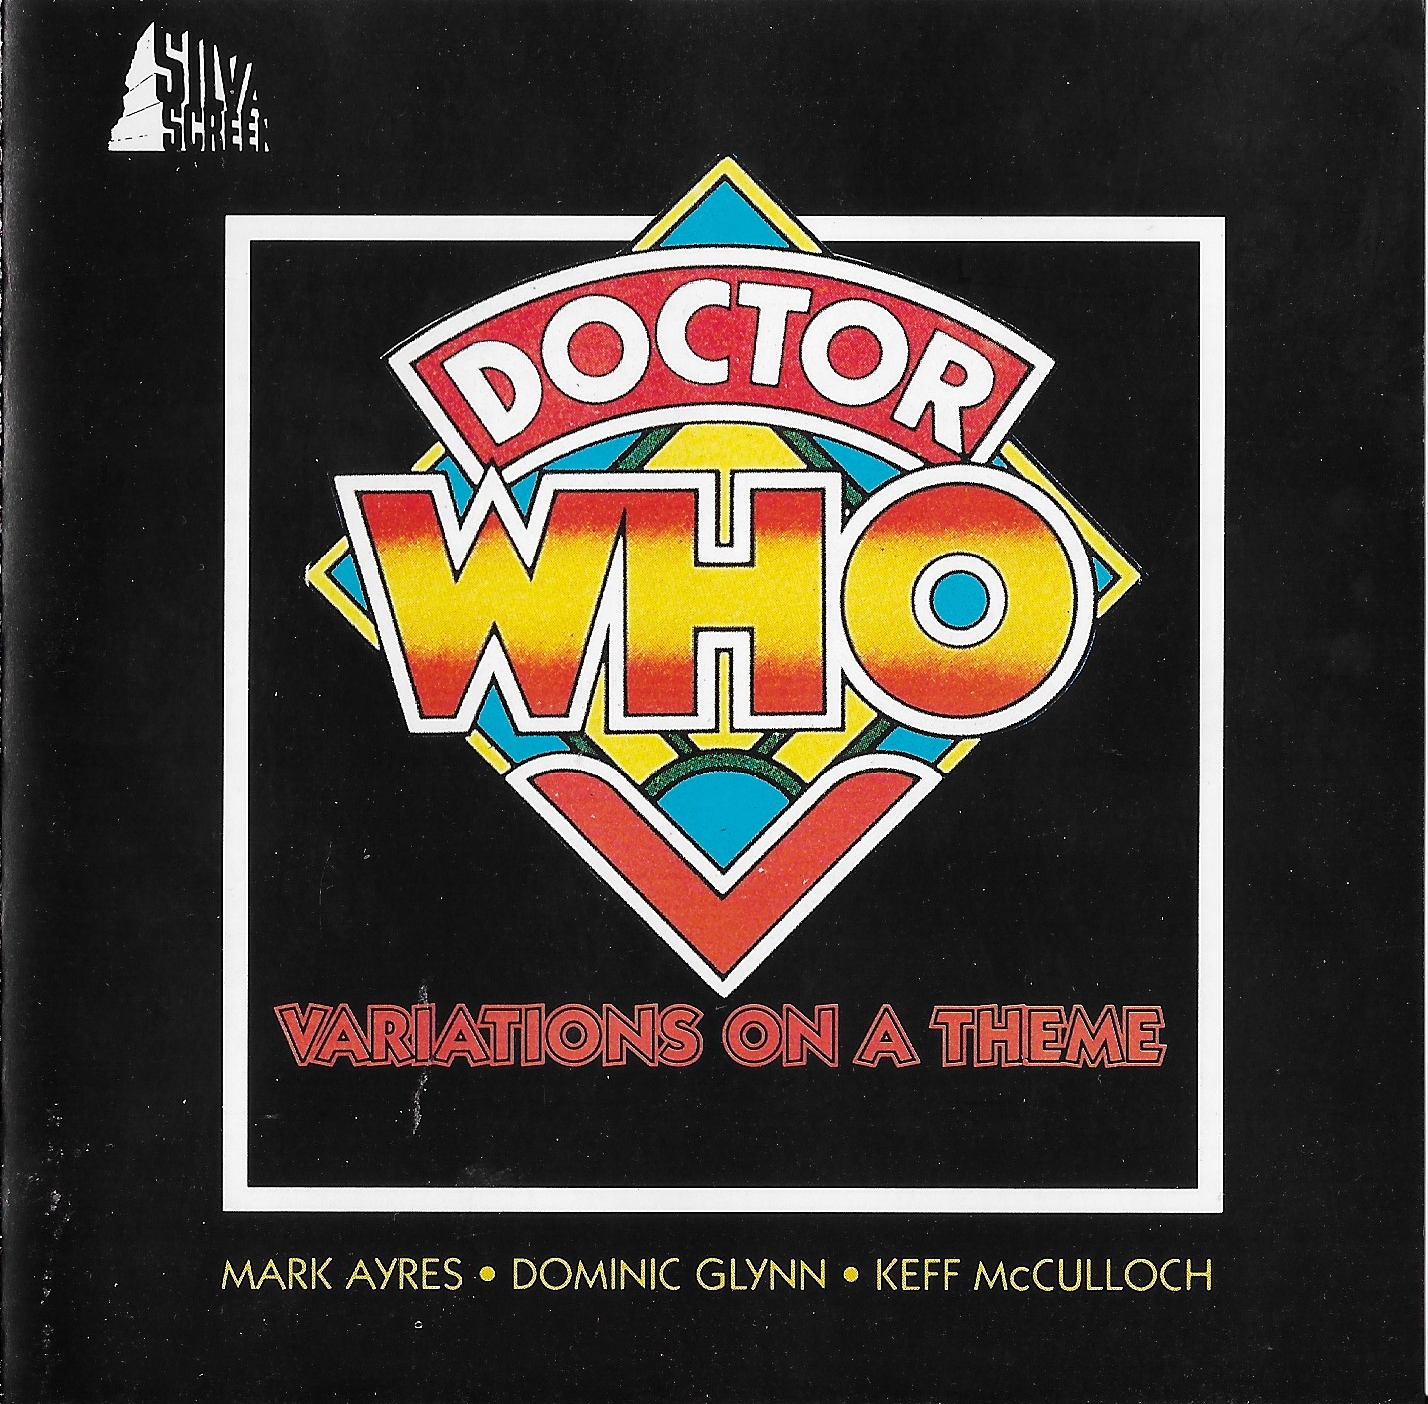 Picture of Doctor Who - Variations on a theme by artist Ron Grainer from the BBC cdsingles - Records and Tapes library